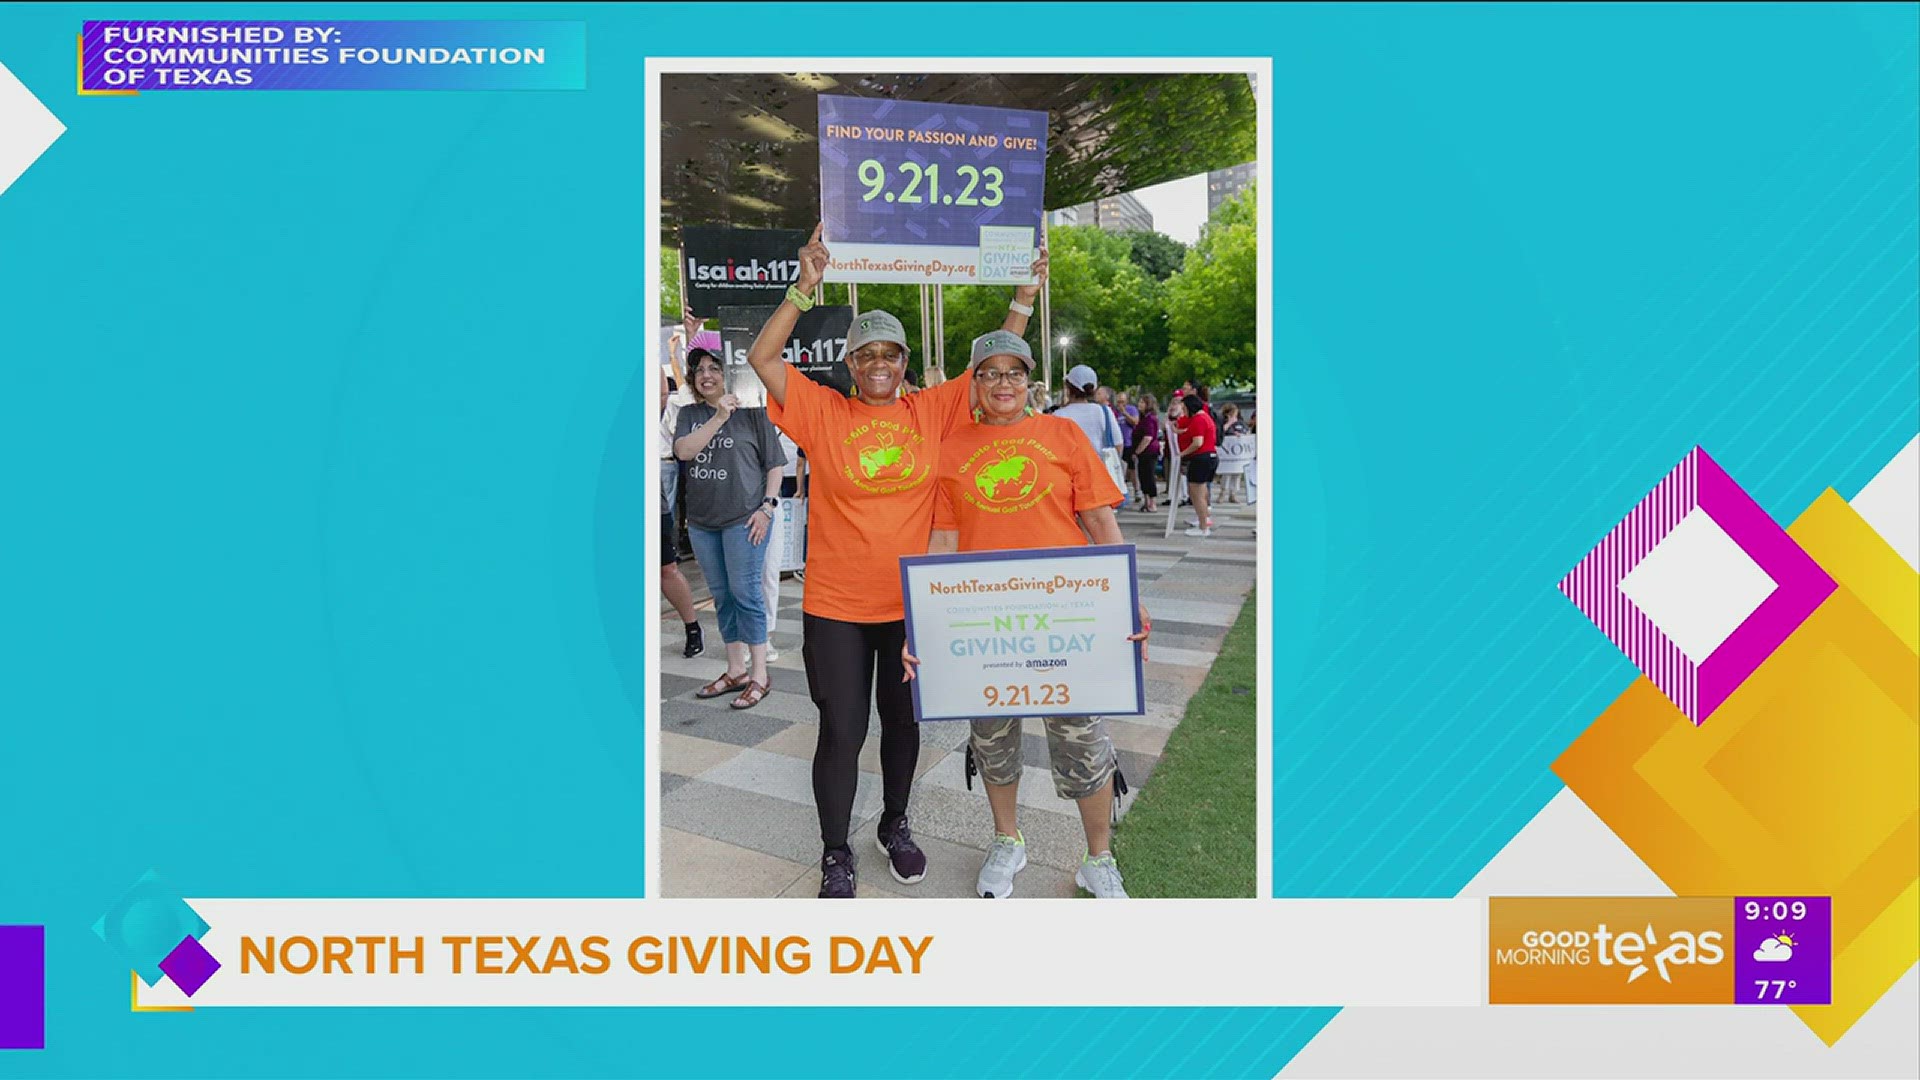 It’s North Texas Giving Day. We highlight some of the nonprofits in North Texas you can make a donation to plus how to stretch your donation dollars.